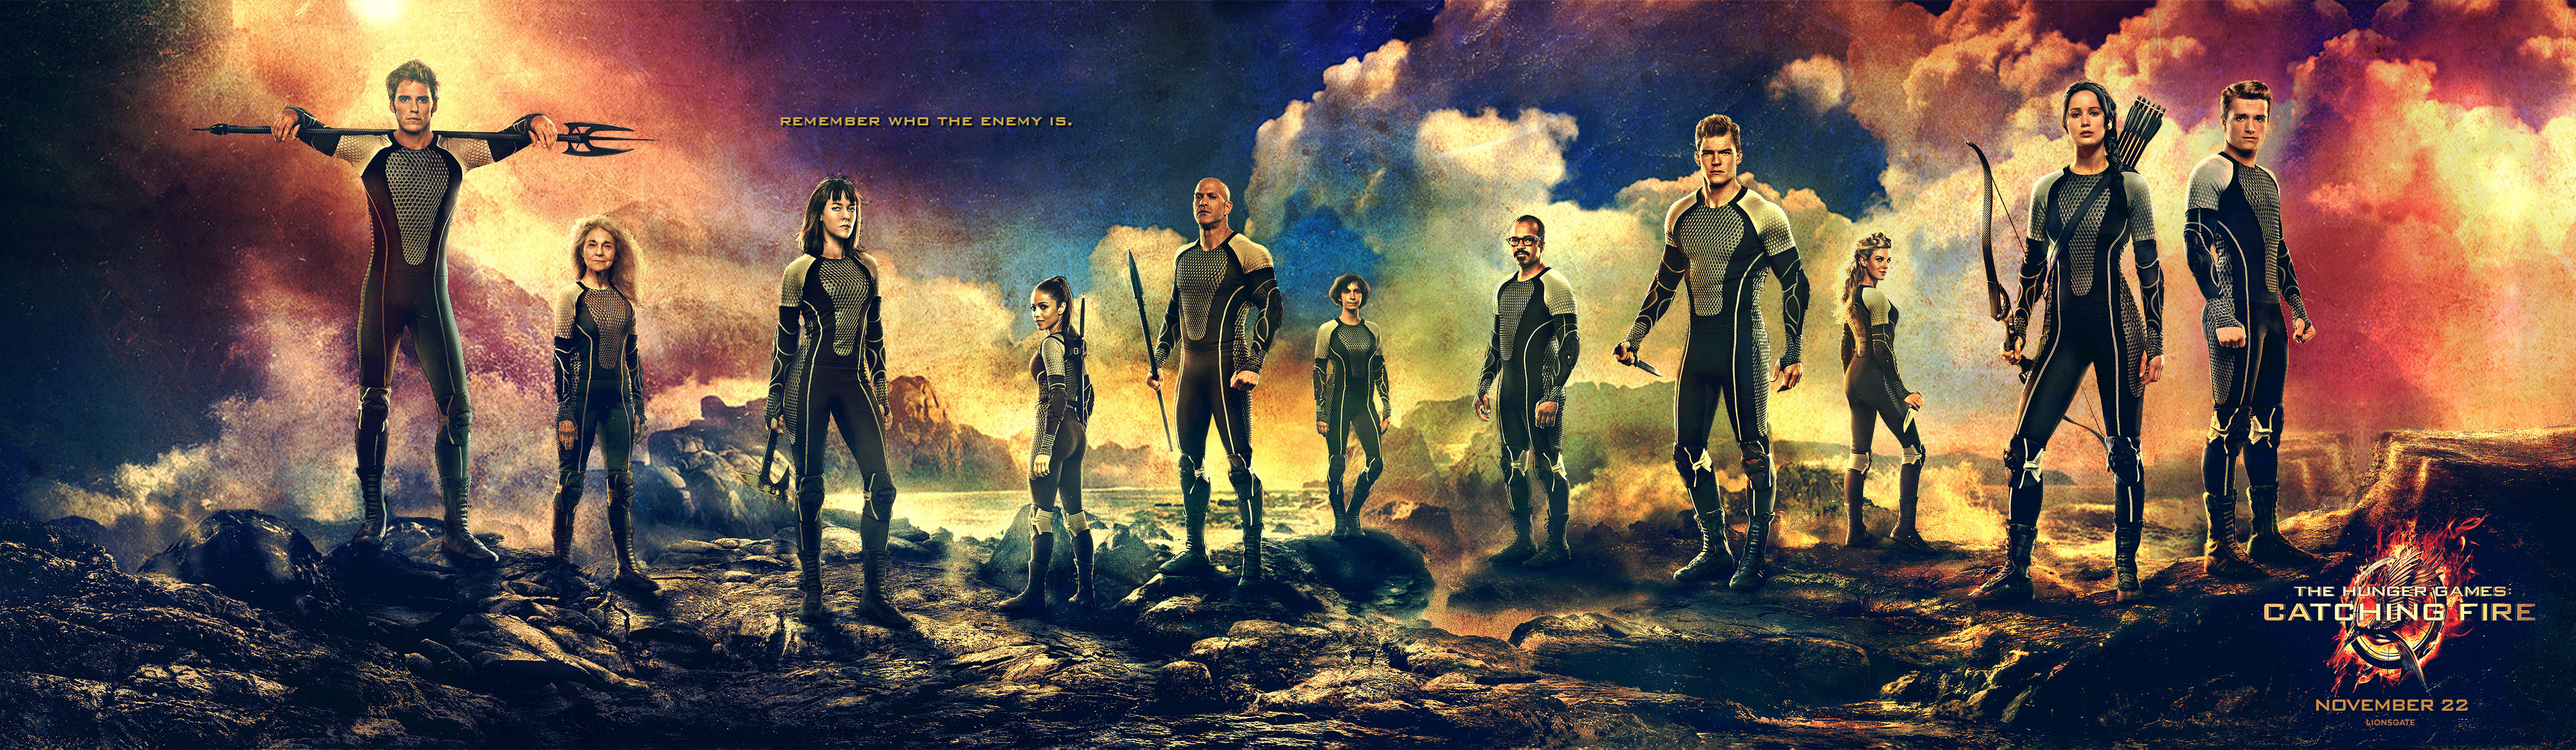 Catching Fire banner full